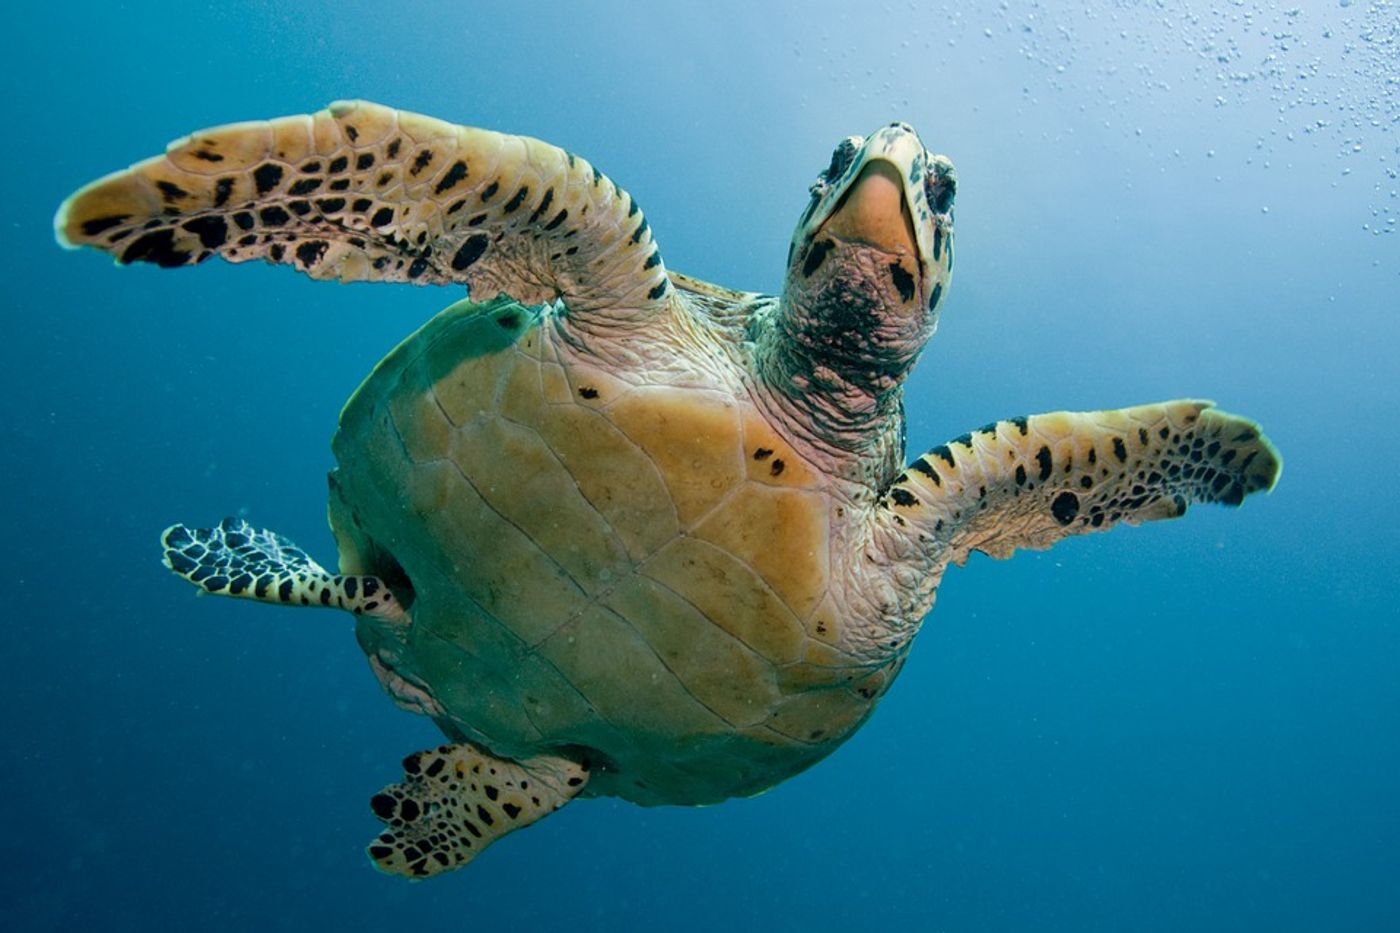 Sea turtles are among some of the most vulnerable marine animals to plastic pollution, but other animals suffer too.